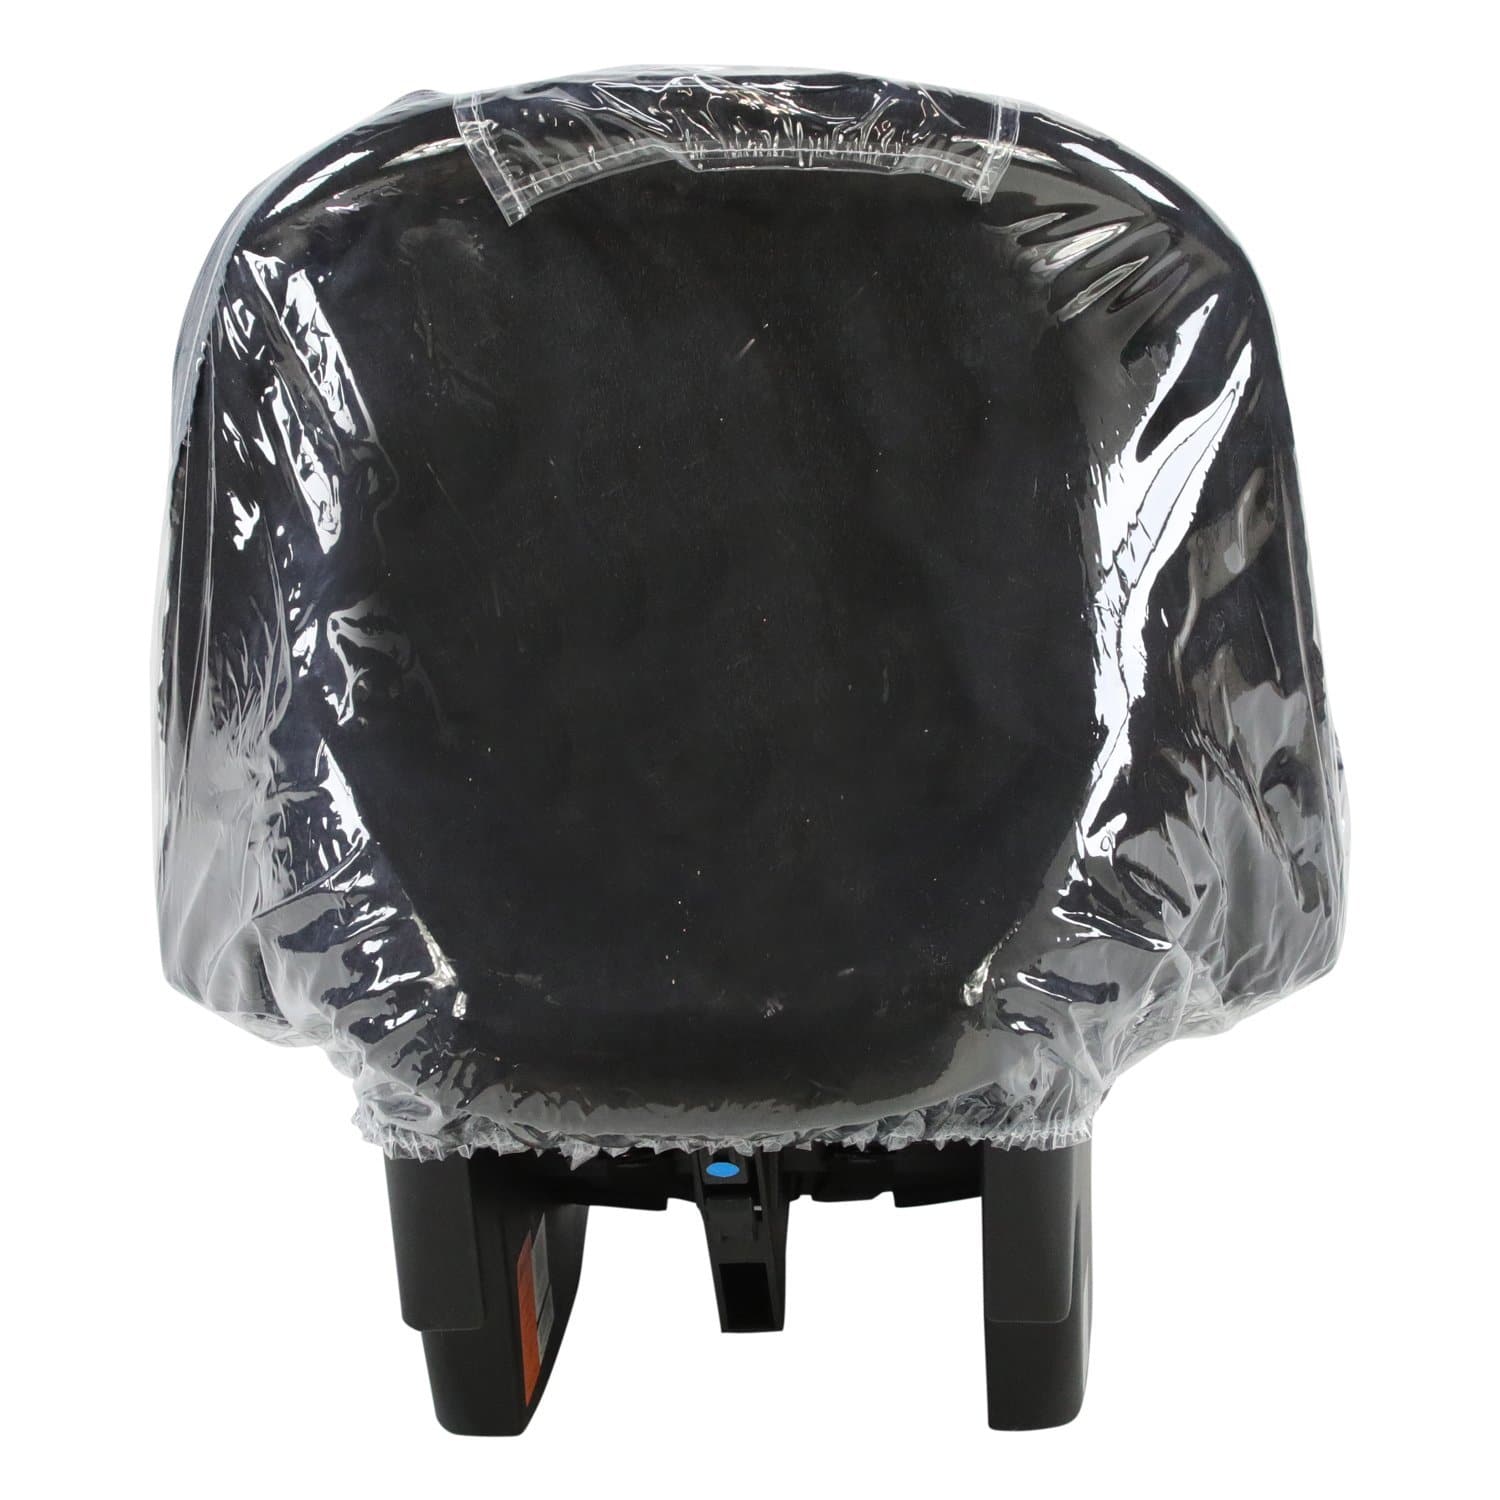 Car Seat Raincover Compatible with Jane -  | For Your Little One